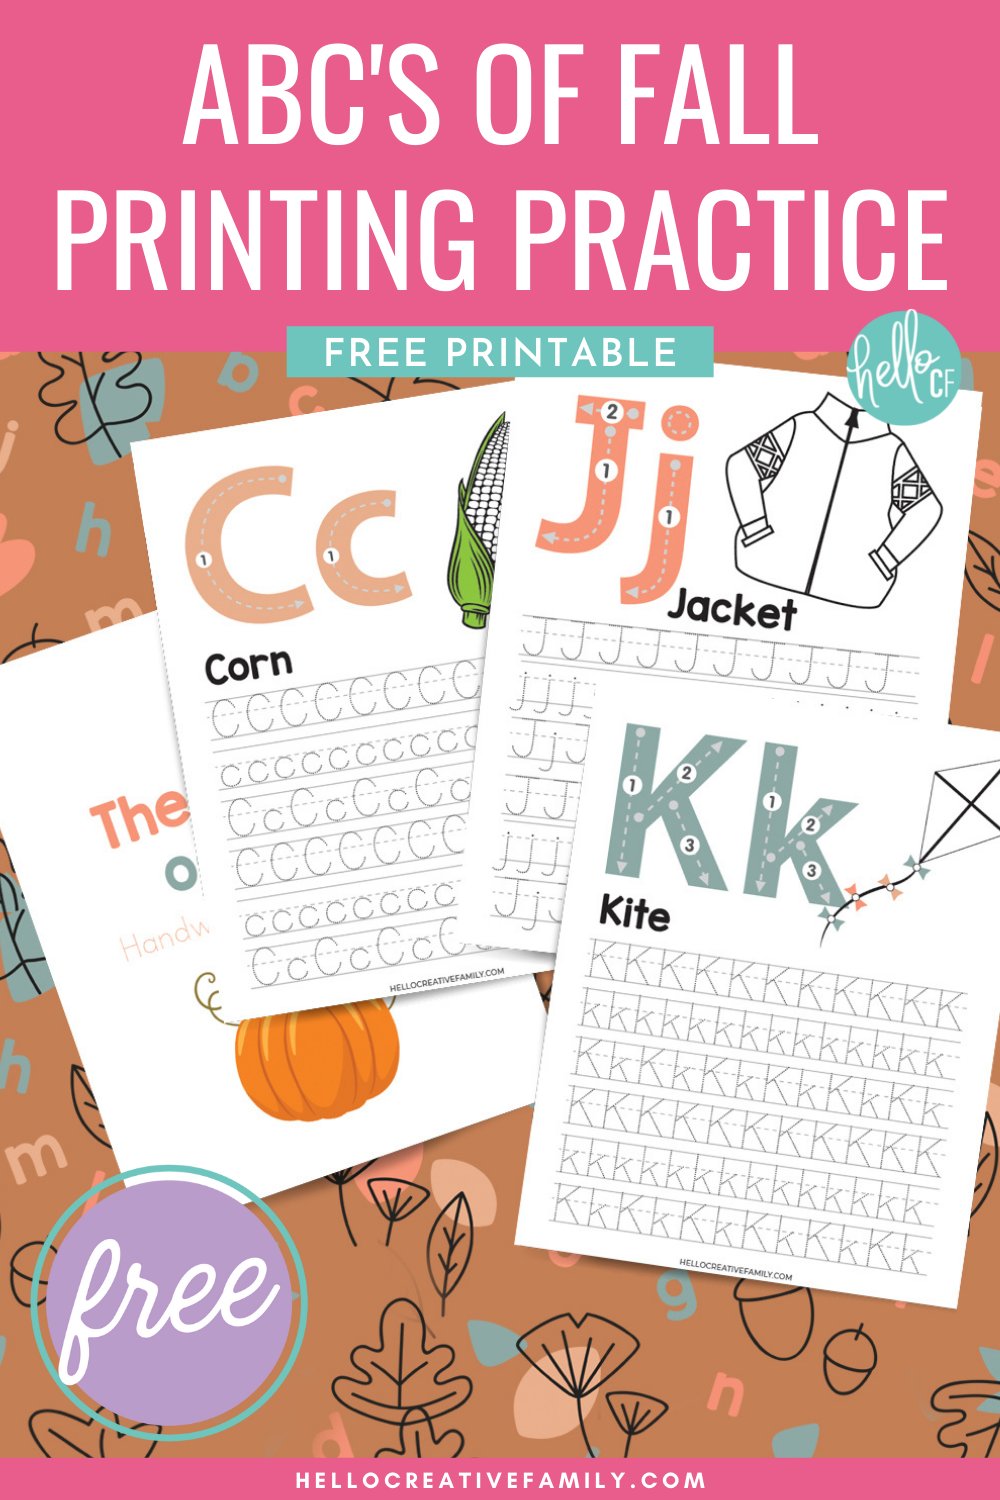 Make learning to write fun with our free alphabet printing practice sheets! This free printable is a simple and easy way for elementary school aged children to learn their alphabet and practice their penmanship. Filled with cute images to celebrate autumn that kids can color in. Learning your ABCs has never been so fun. With both uppercase and lowercase letters you can laminate these free worksheets to use again and again.